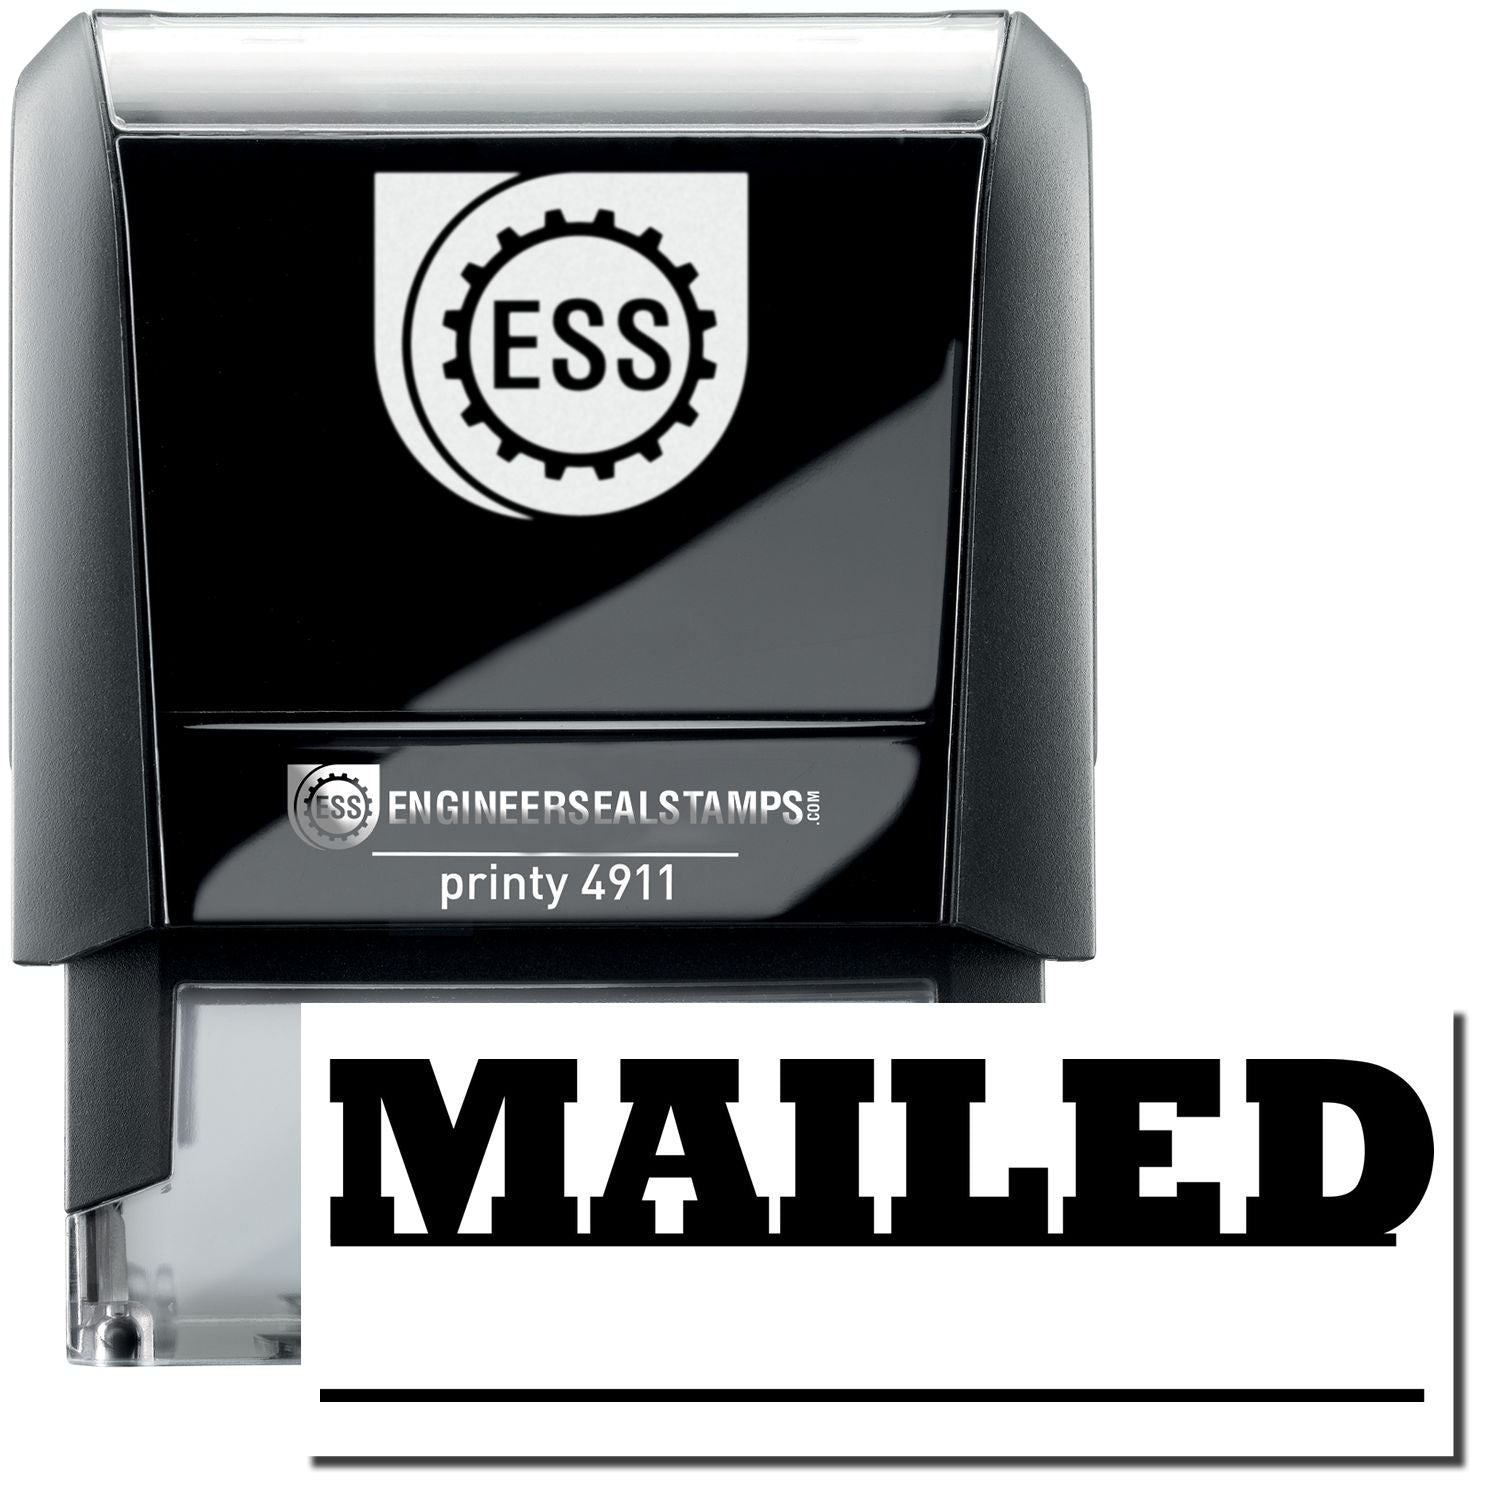 A self-inking stamp with a stamped image showing how the text "MAILED" in a large font with a line underneath where a date, time, or signature can be placed is displayed after stamping.